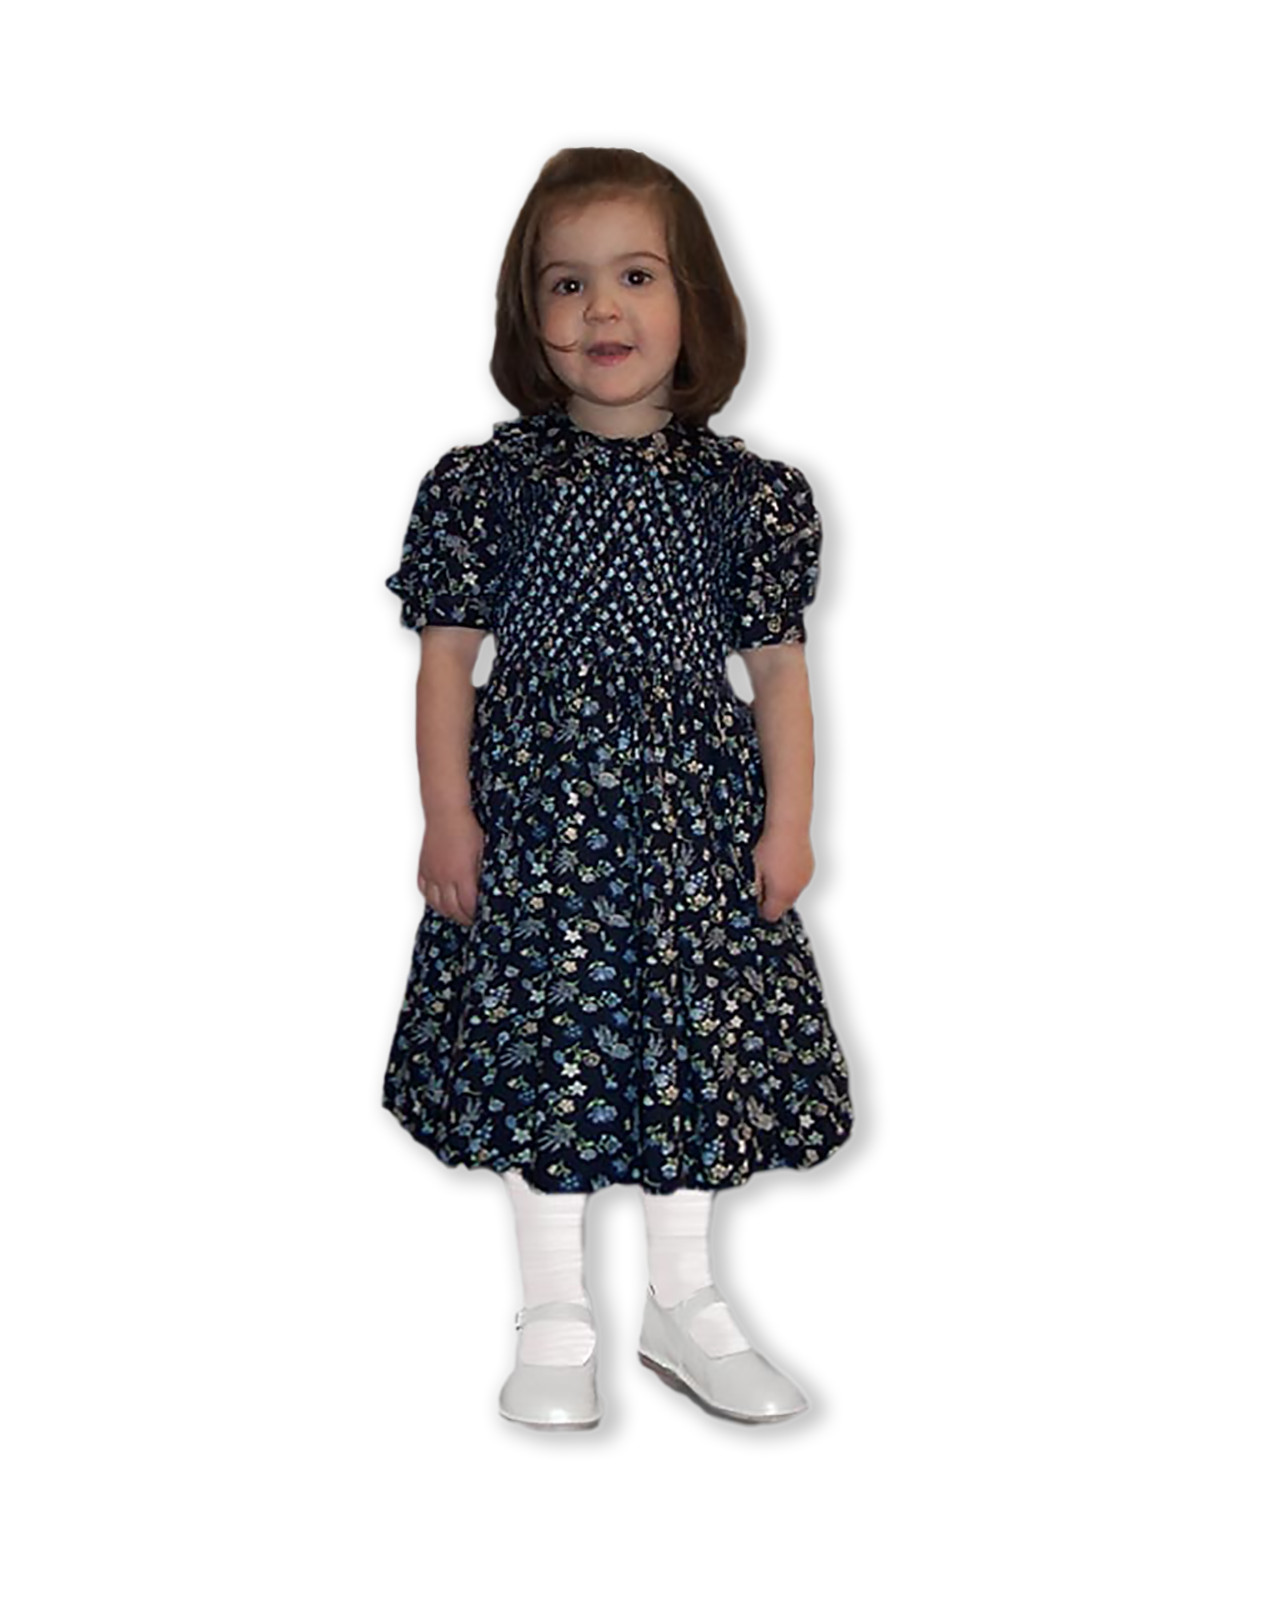 Liberty flowers finest cotton dress for girl, 